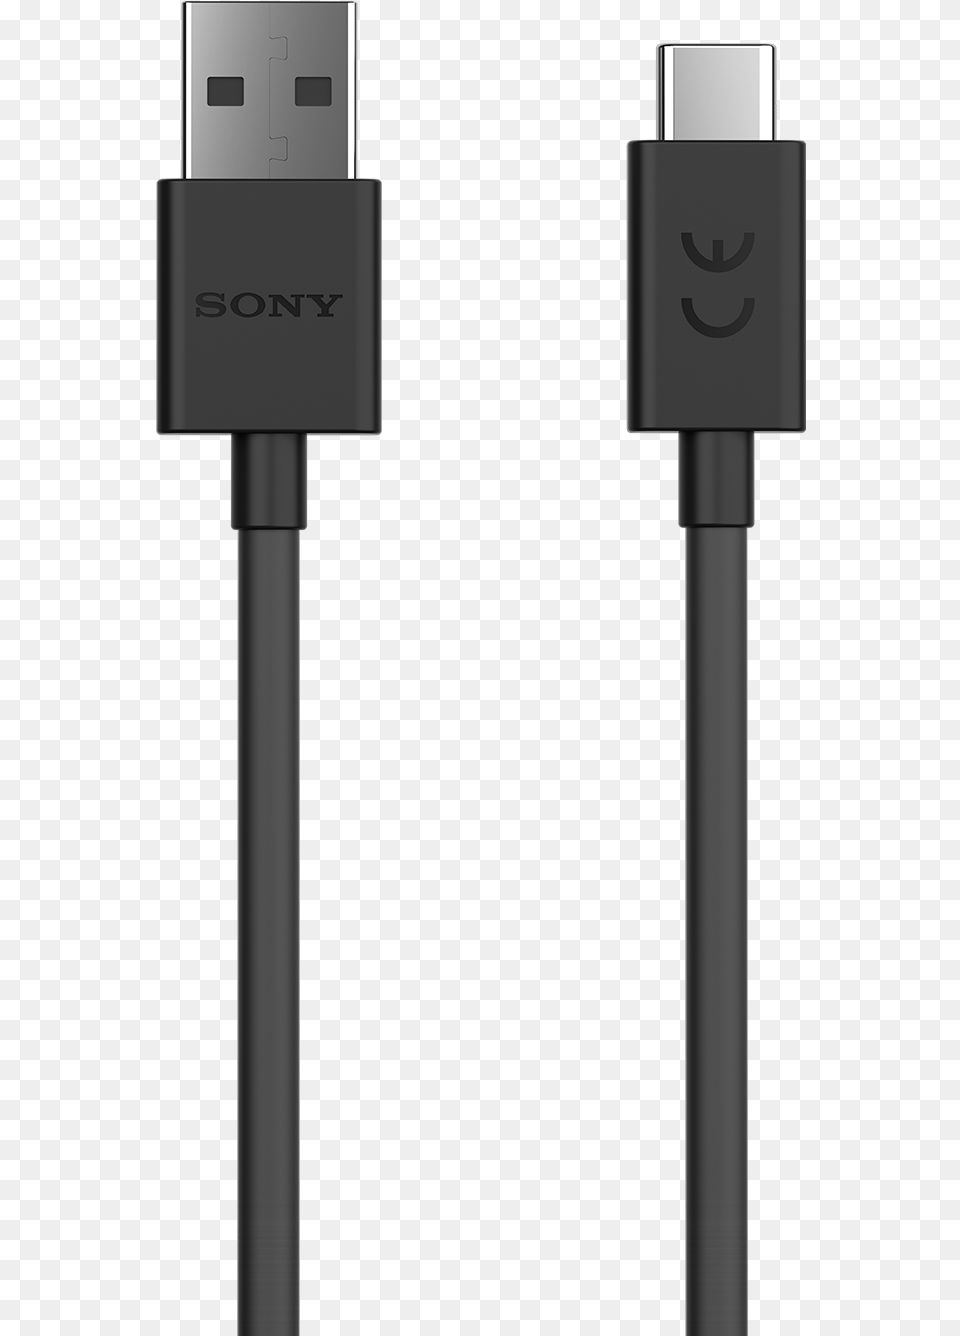 Usb Type C Cable Ucb20 Moto G5 Plus Charger Cable, Adapter, Electronics Png Image